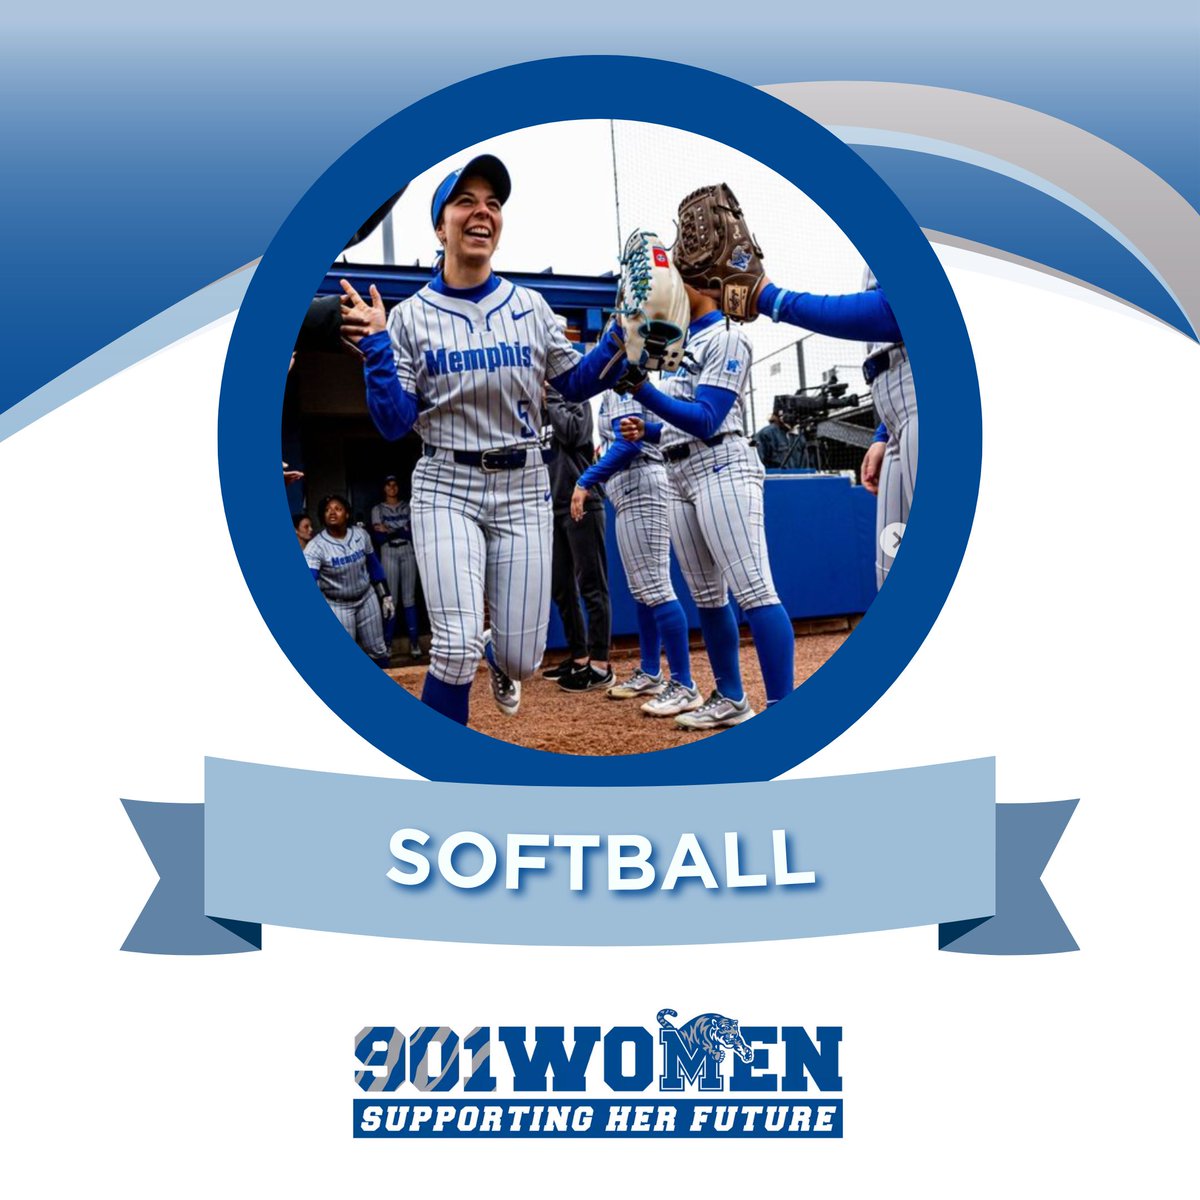 Congratulations to the #901Women @memphissoftball team for an incredible spring season. Your determination and spirit have shone bright every step of the way!

#UofM #GoTigersGo #UniversityofMemphis #UniversityofMemphisSports #UniversityofMemphisWomensAthletics #WomenInSports